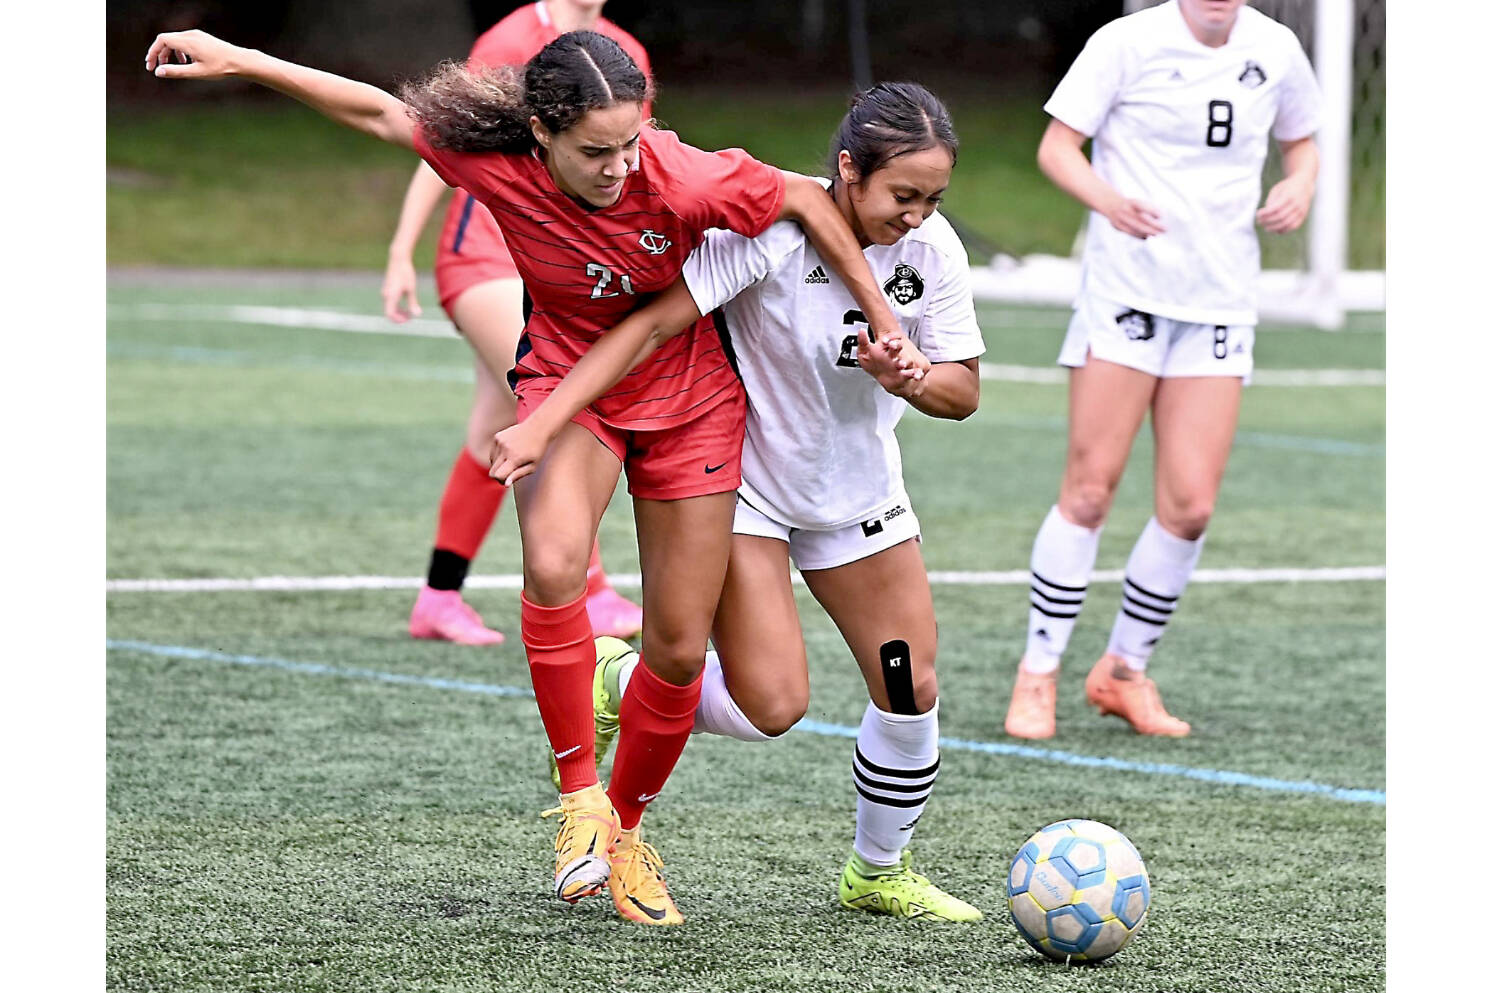 Peninsula College's Briana-Jean Tanaka (2) battles with Lower Columbia's Nataija Blaylock (21) for the ball in an NWAC Friendly held Tuesday in Tukwila. In the background is Peninsula College's Anna Petty. Tanaka and Petty each scored two goals as Peninsula won 8-1. (Rick Ross/Peninsula College)